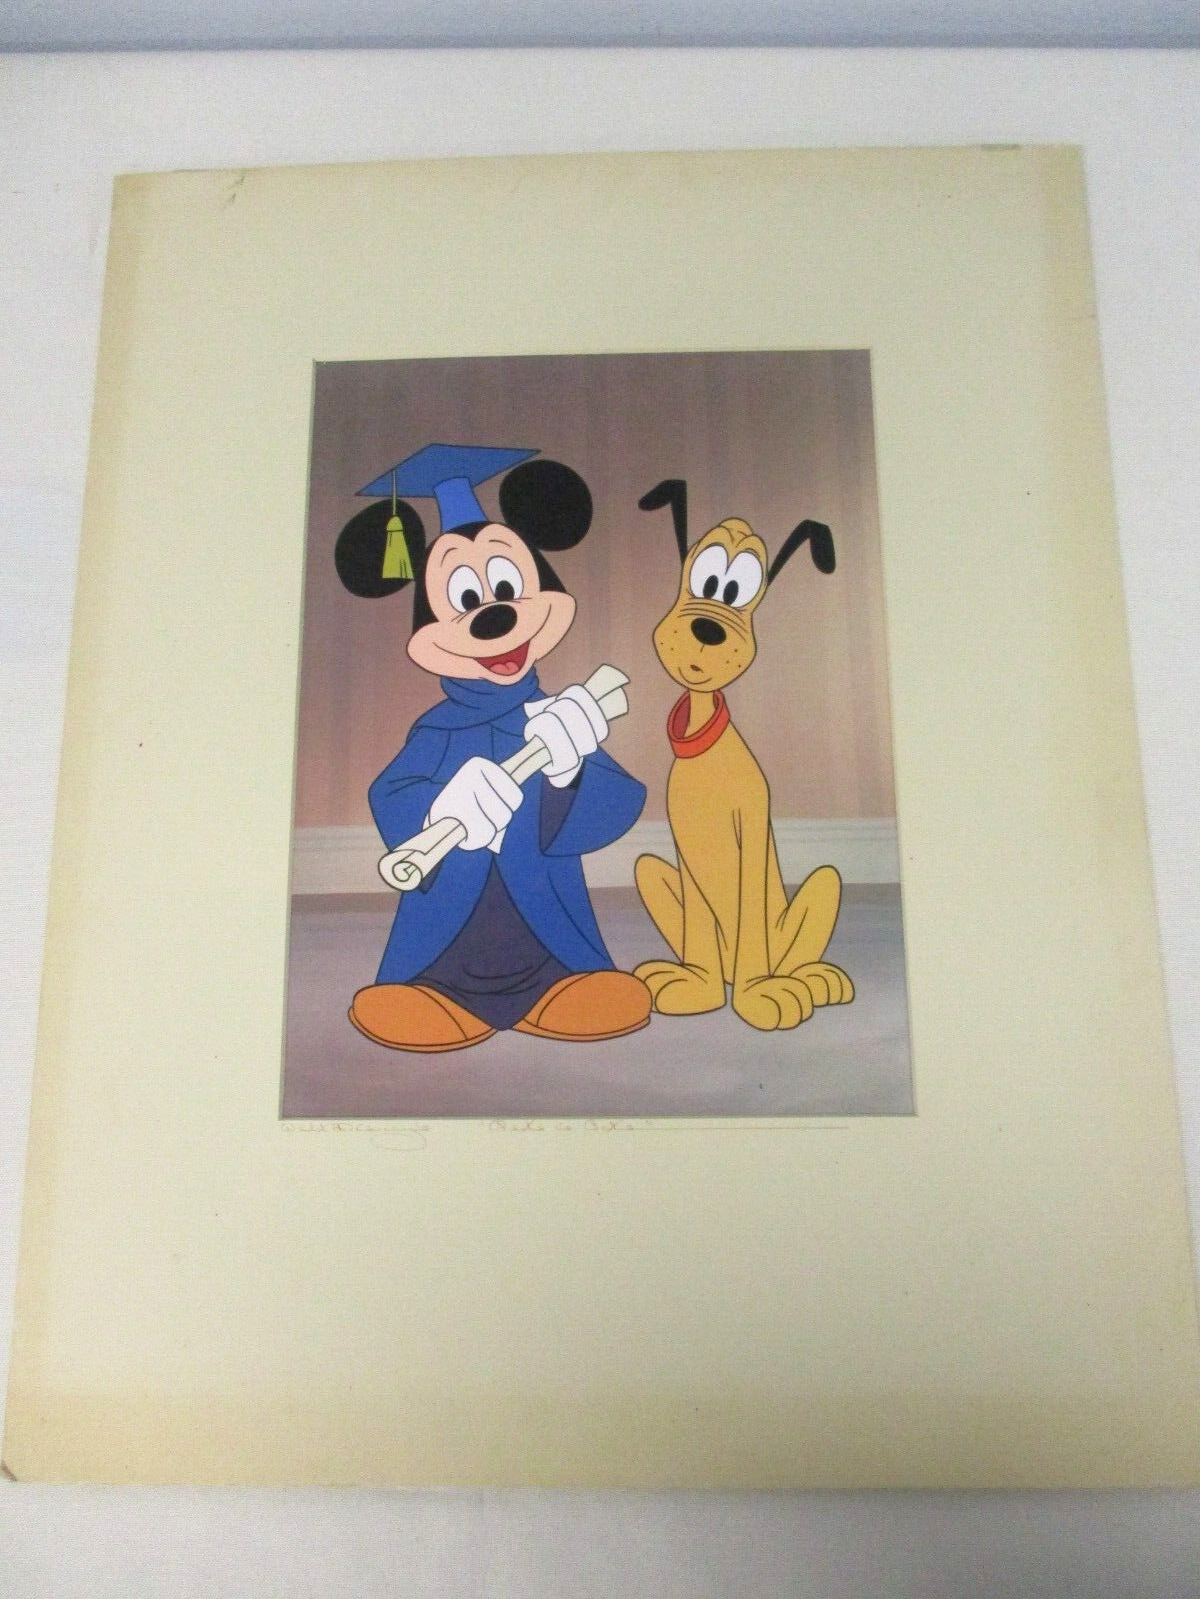 HAND SIGNED WALT DISNEY PETS IS PETS REPRODUCTION OF ORIGINAL CELLULOID DRAWING